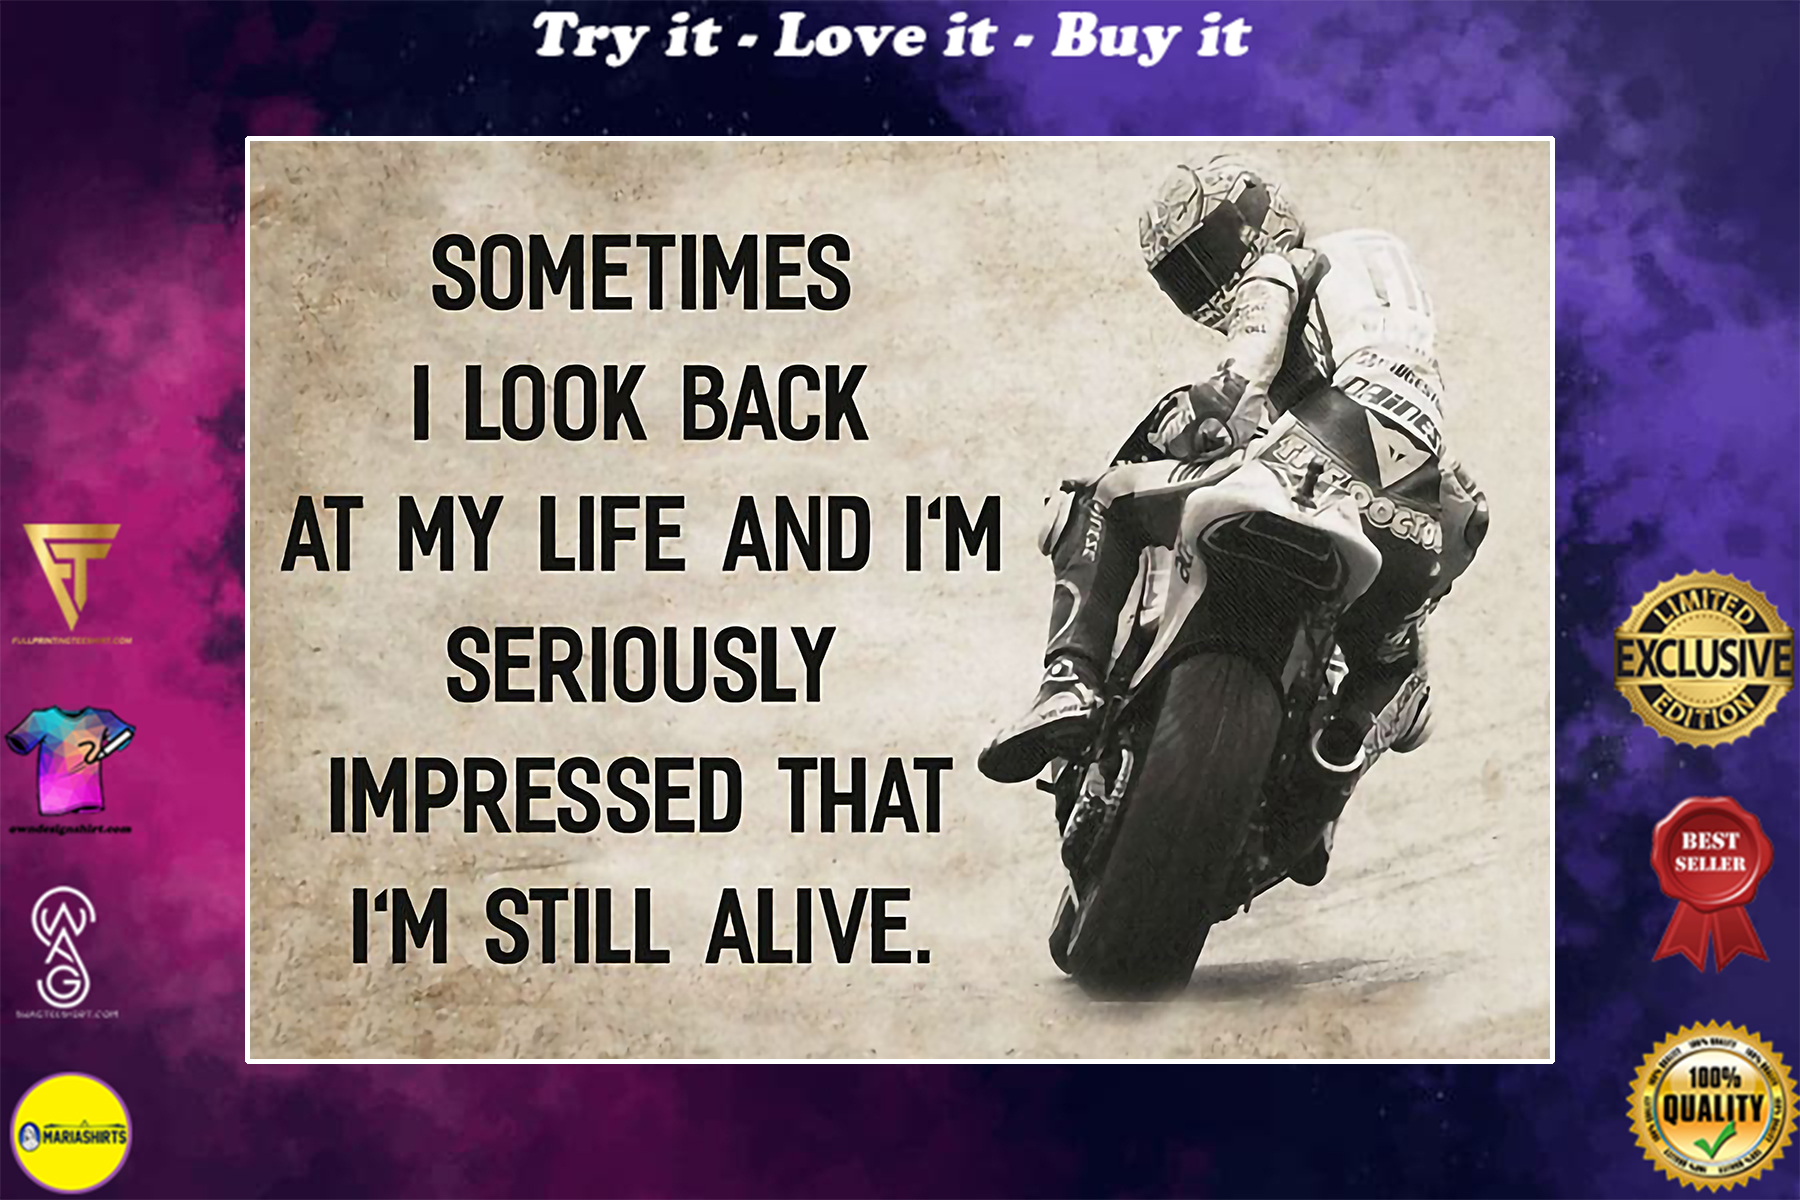 vintage motorcycle sometimes i look back at my life poster